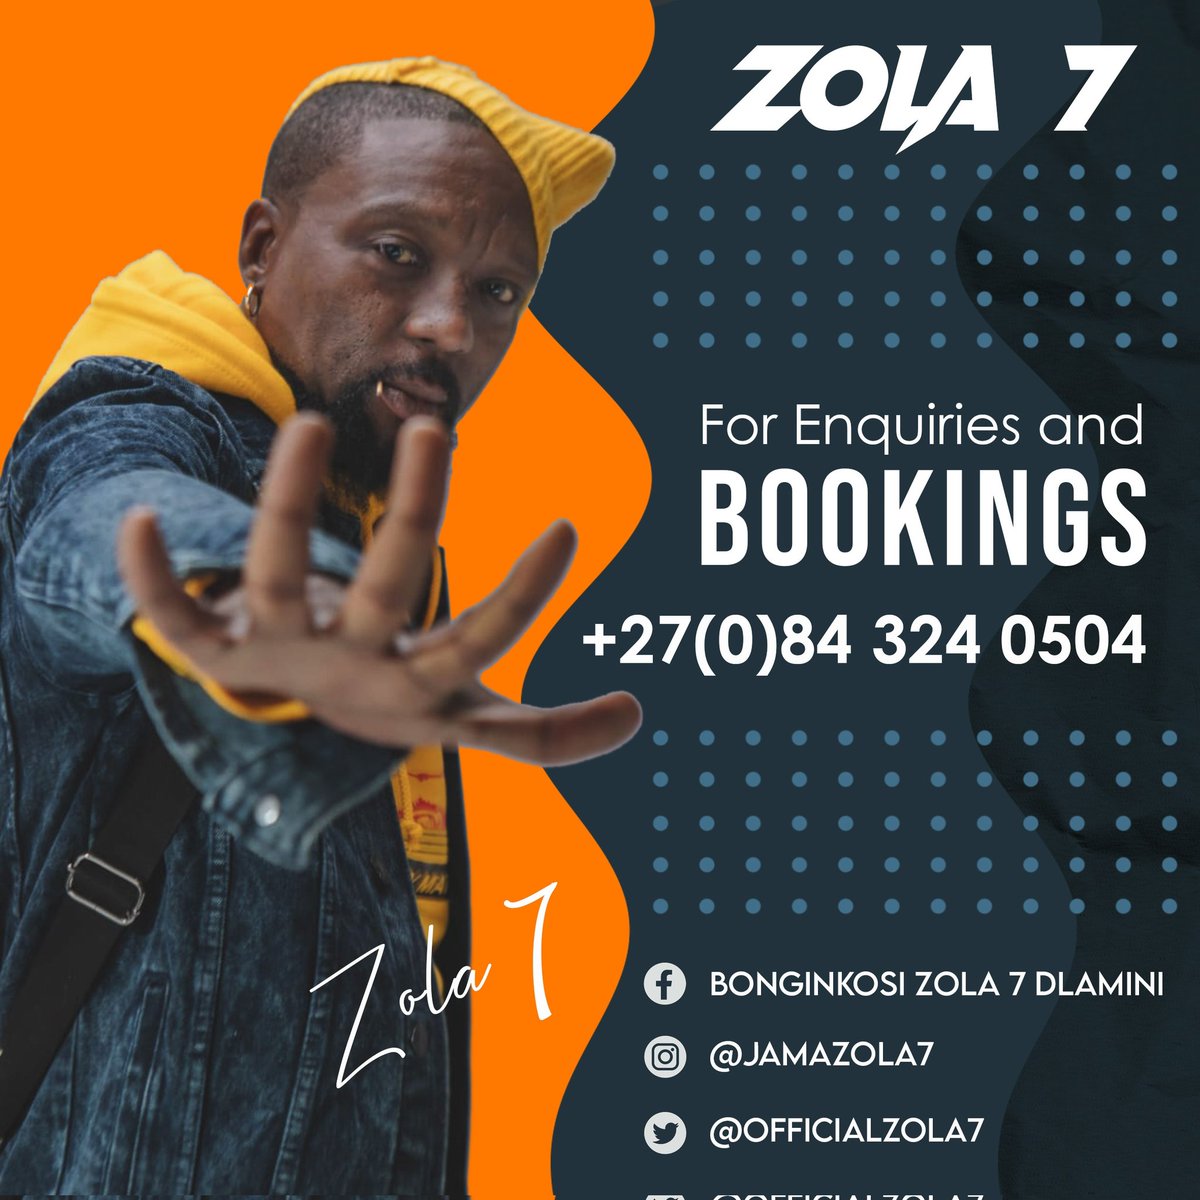 'I need you at my event' is not a booking. Contact my management on the below number to make an official booking. #namanje